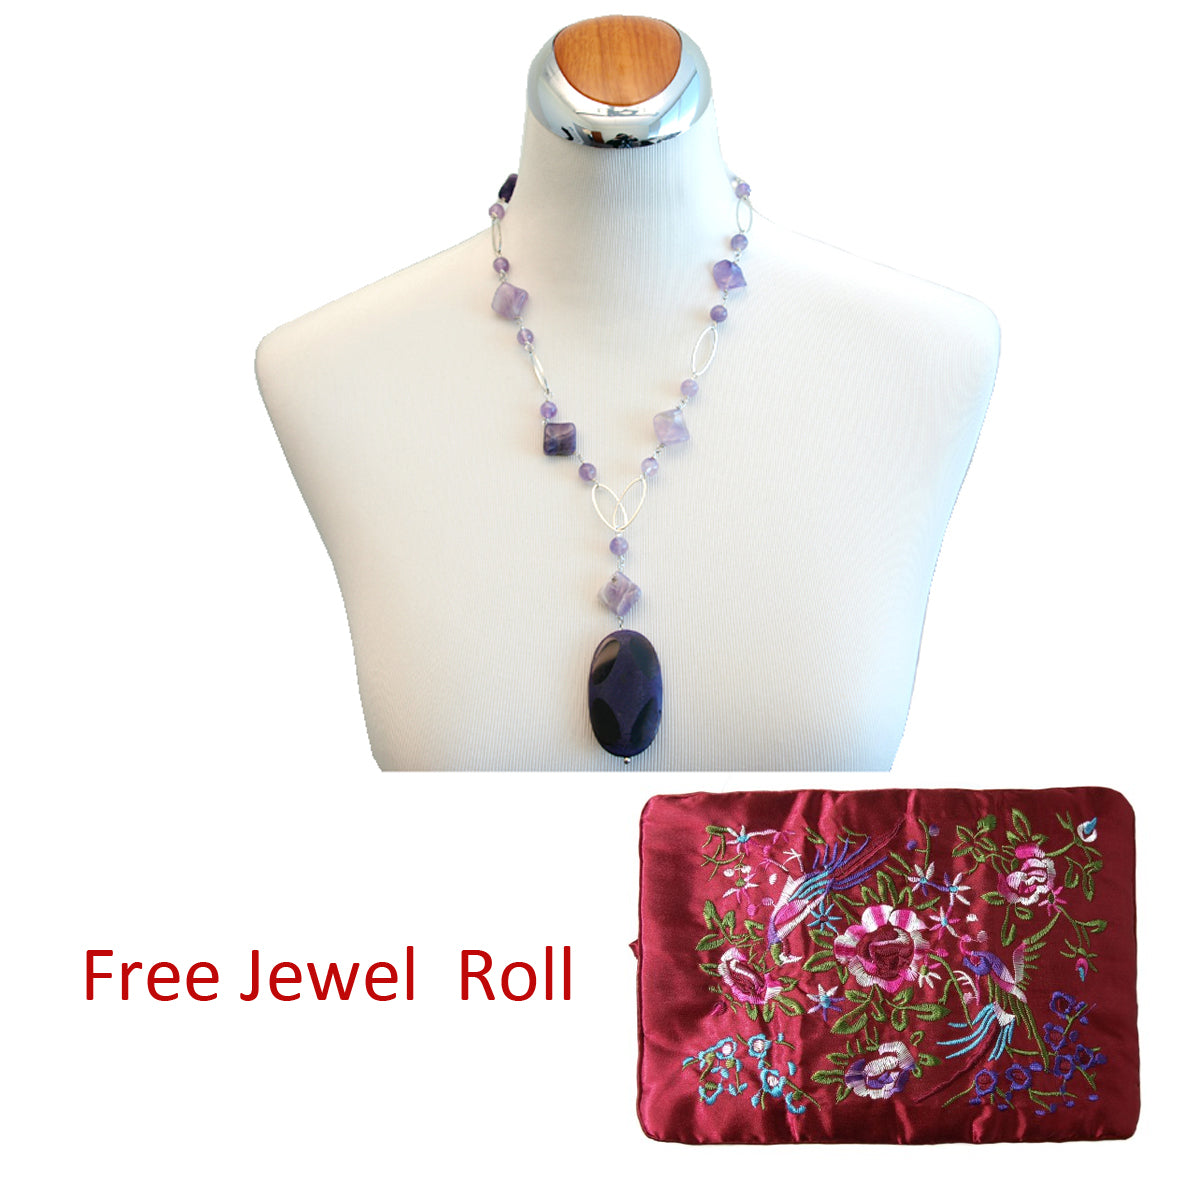 Royal Purple Drop Pendant Necklace, 23.6 inches + Large Burgundy Silk Embroidered Jewelry Roll